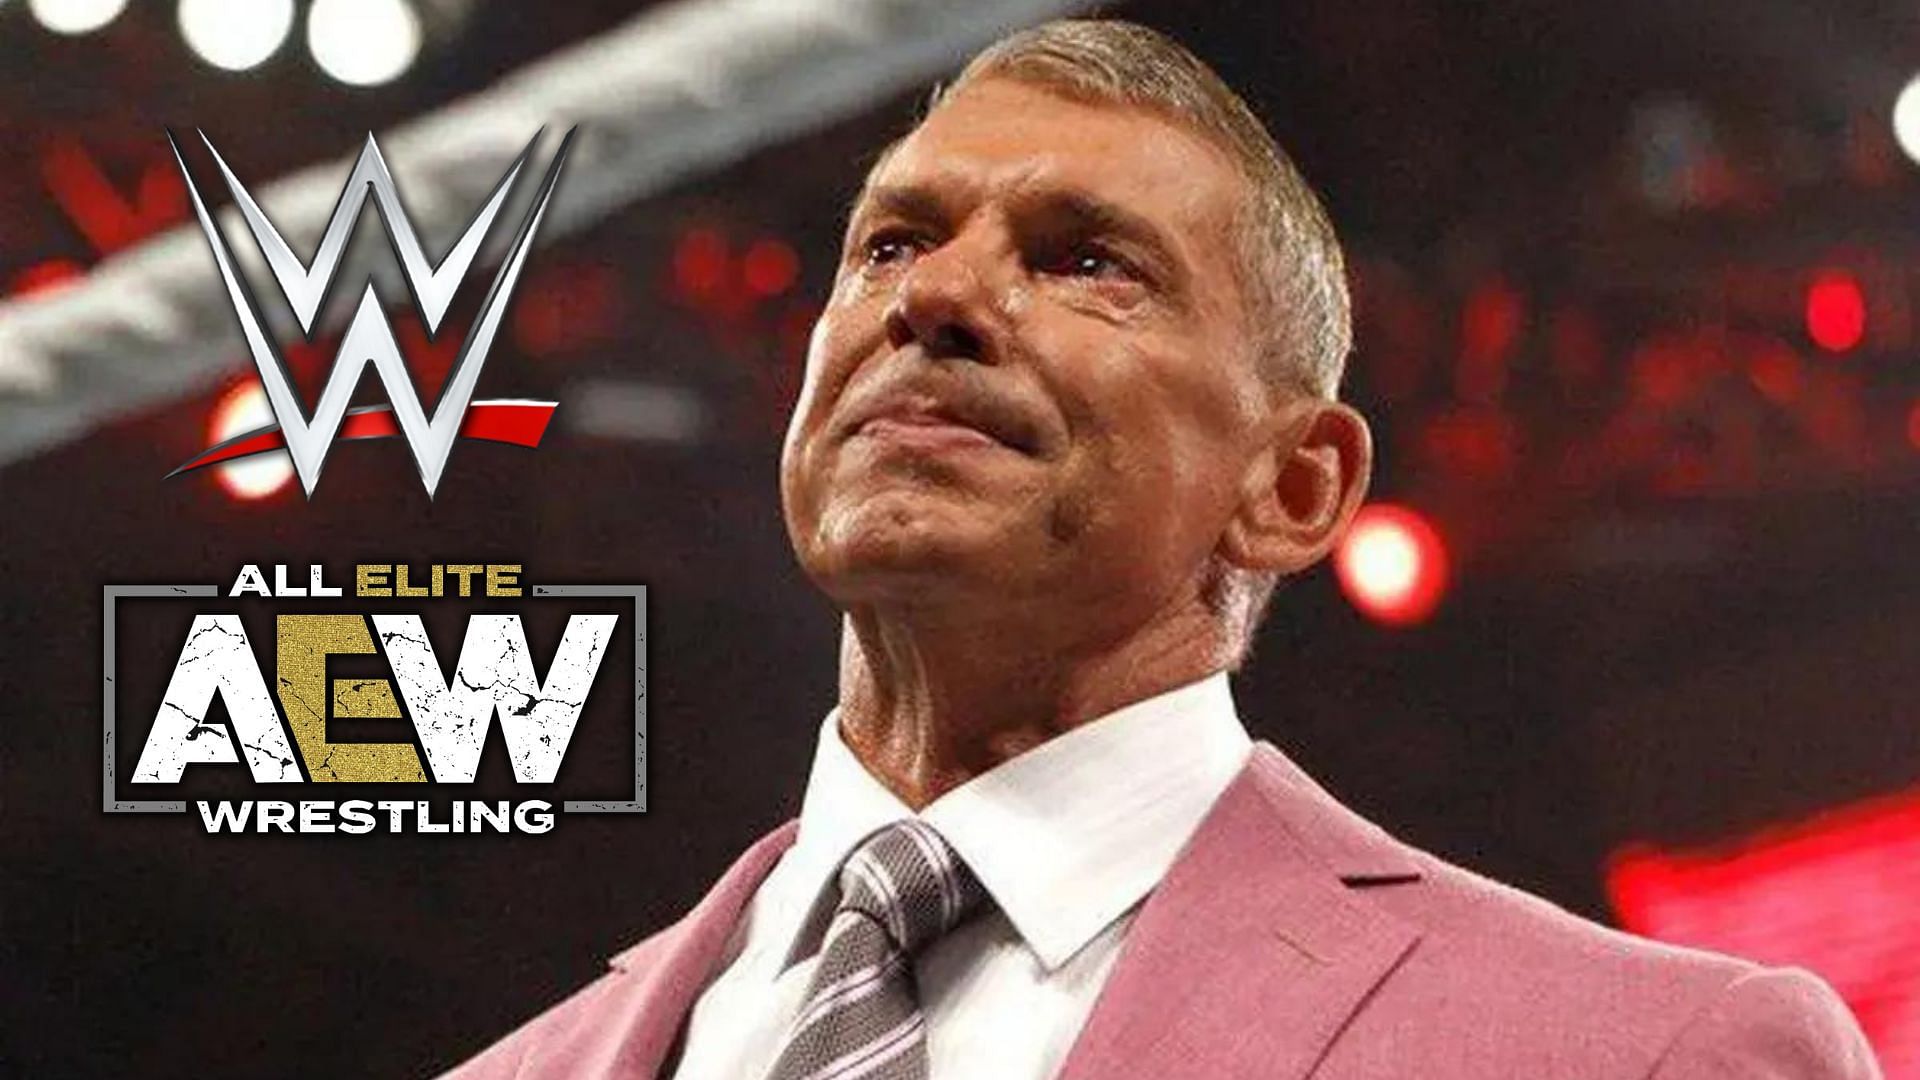 Vince McMahon came under fire this week